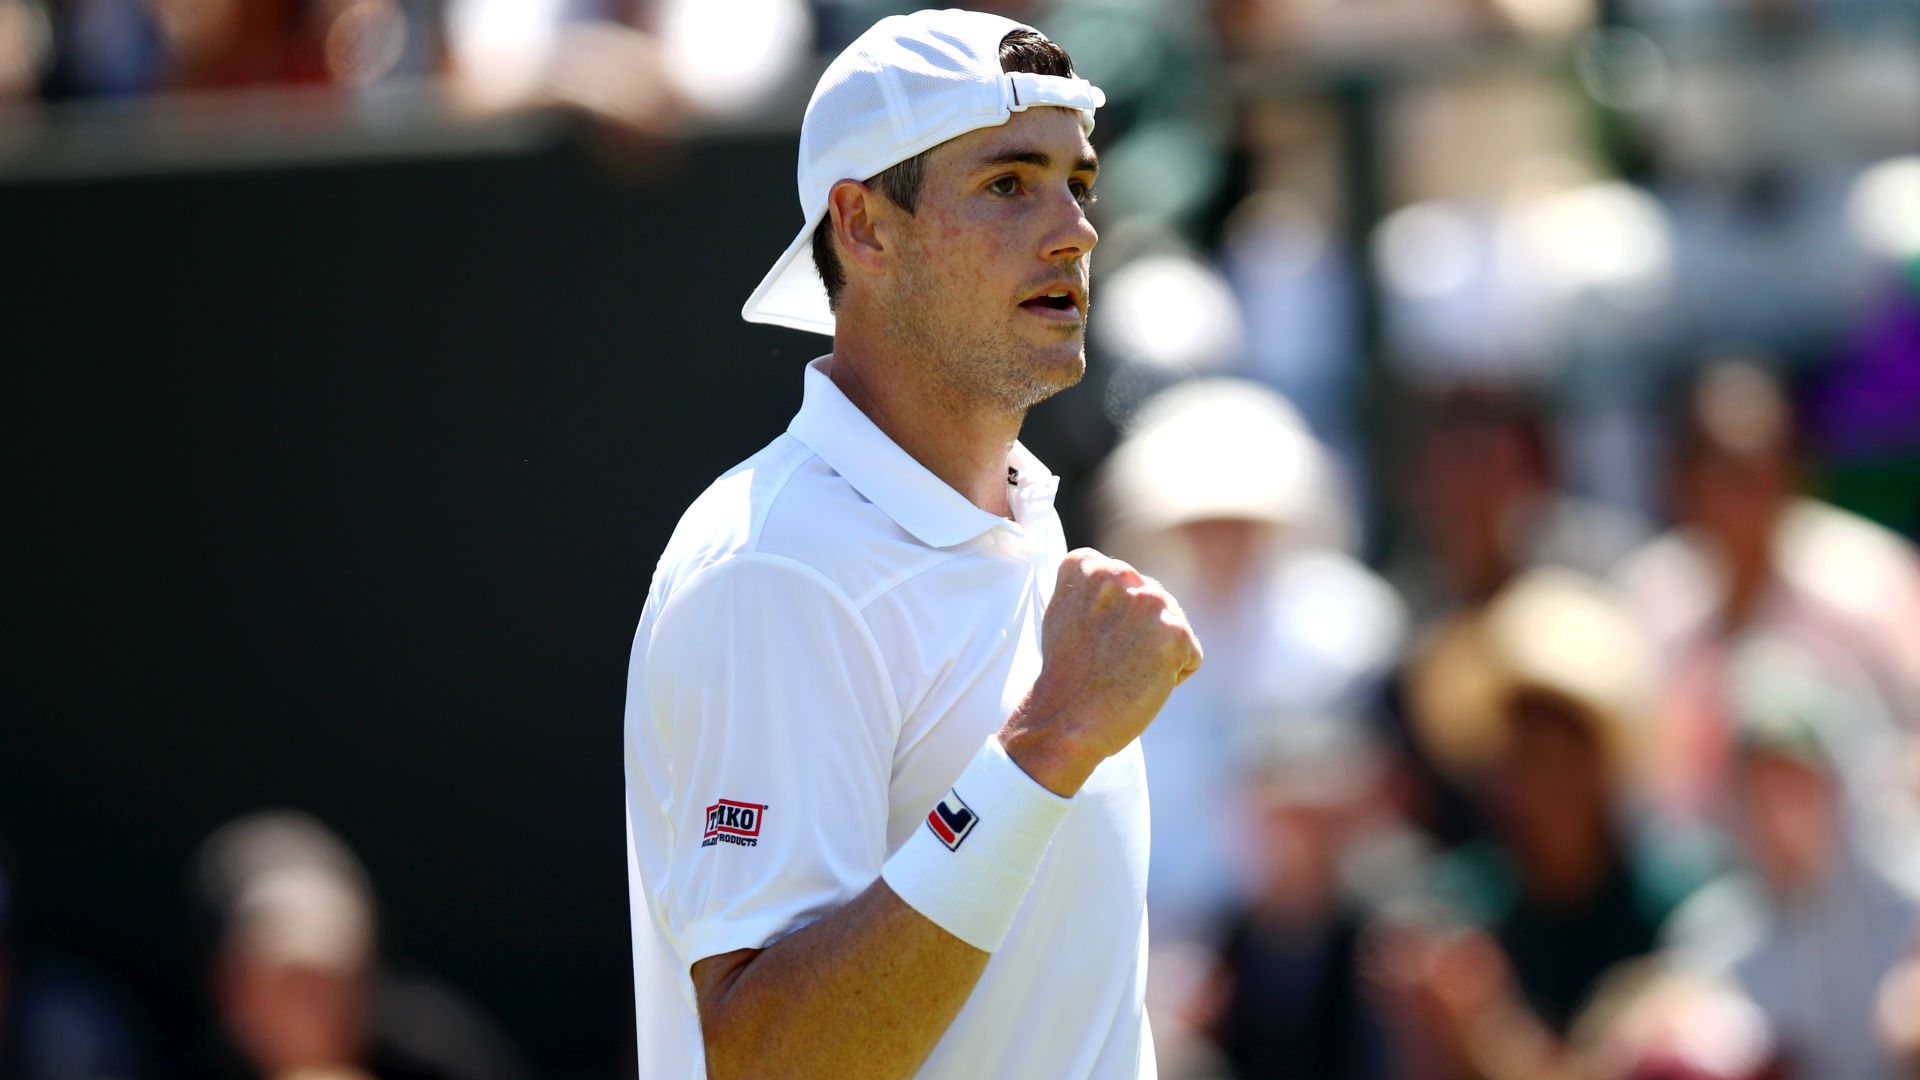 In a repeat of the 2017 final, John Isner sent down 24 aces to knock Matthew Ebden out of the Hall of Fame Tennis Championships.